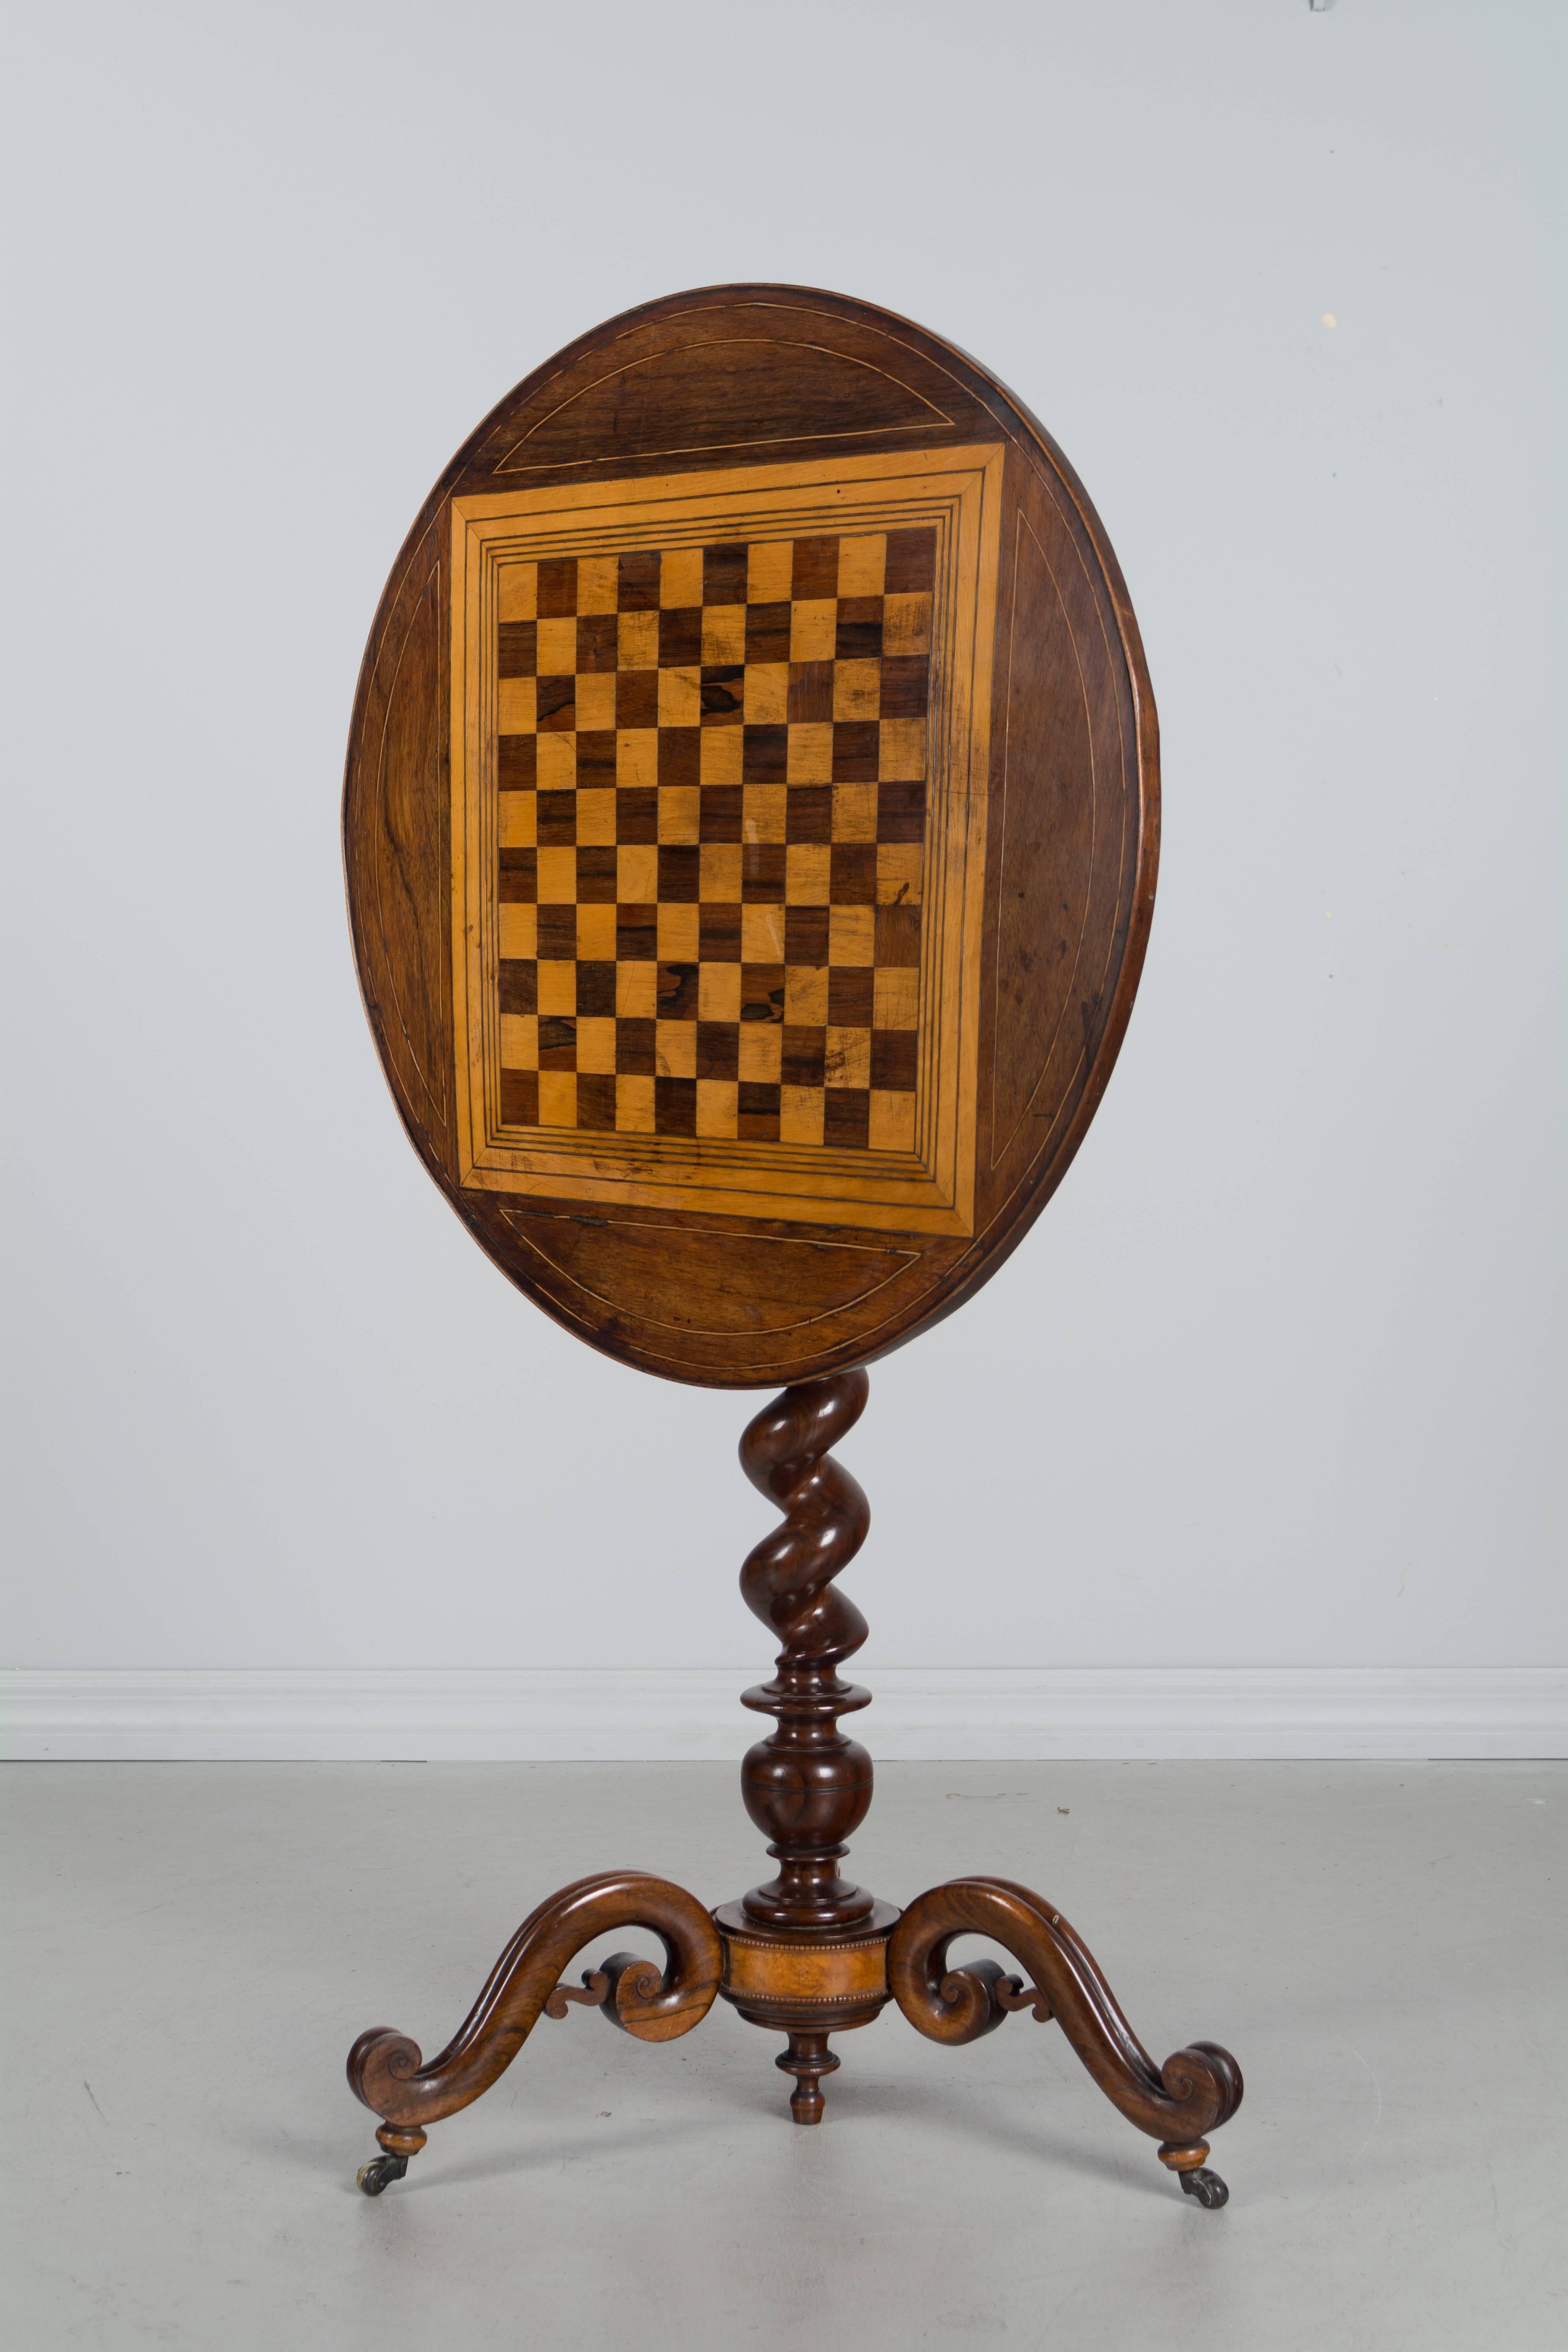 An early 19th century French tilt-top game table with finely turned pedestal base made of solid rosewood. A beautifully crafted table with precise inlaid checkerboard and beautifully carved legs. The top shows nicely when tilted, but is quite